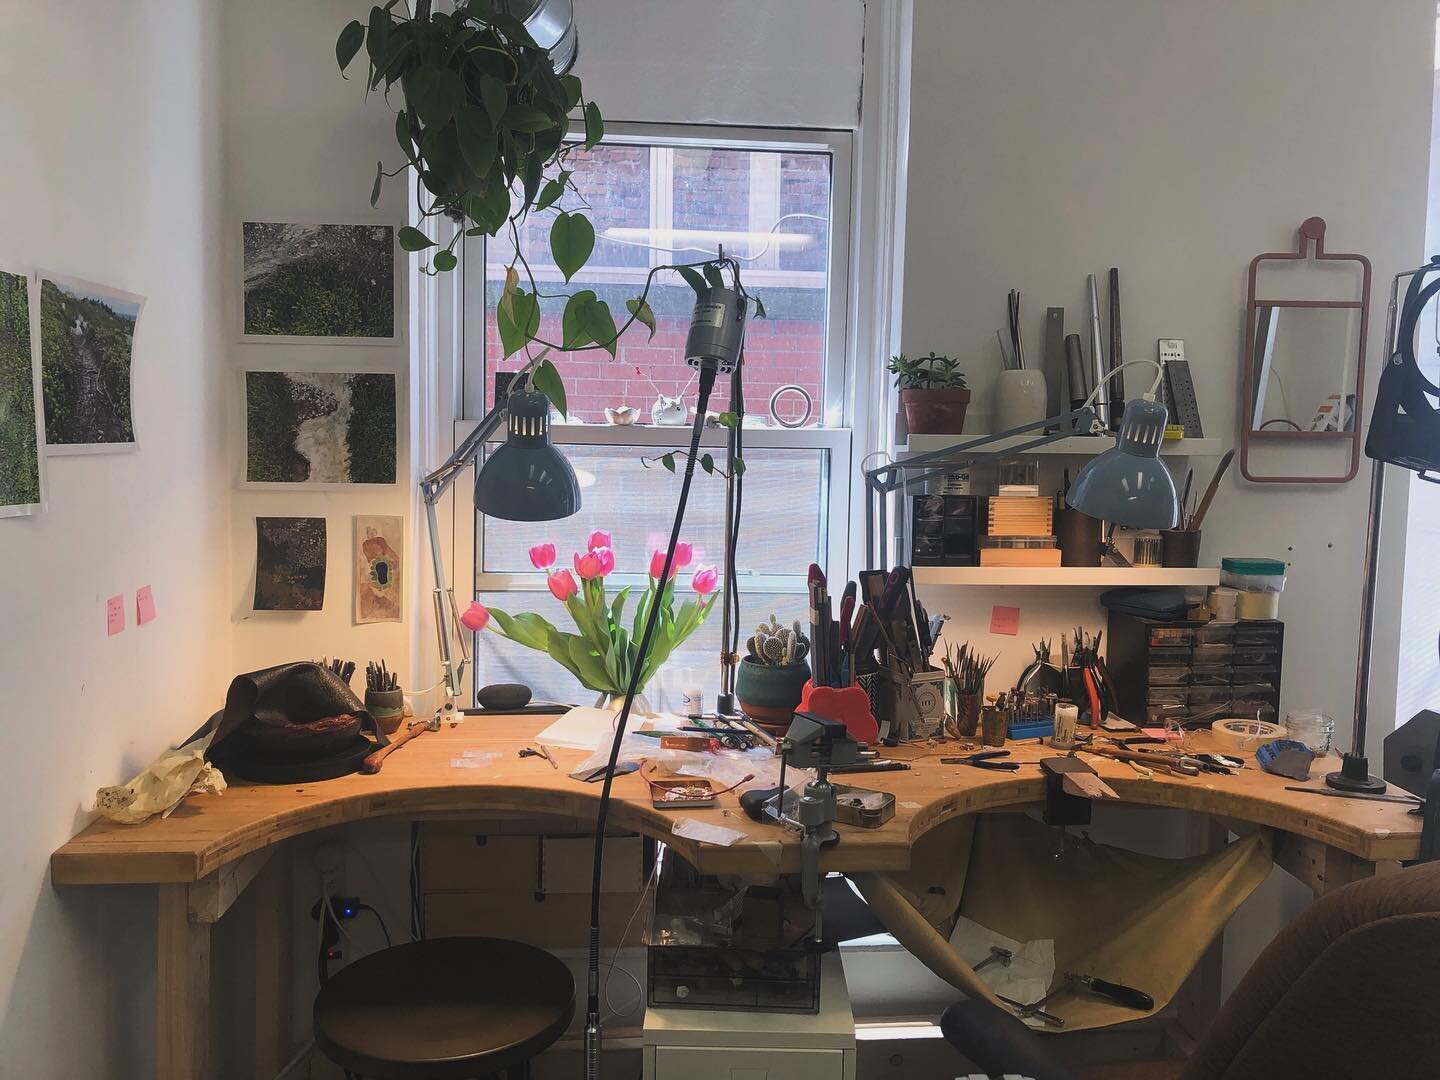 Thinking about this sweet little studio @mtcartiststudios today as we get closer to Mondays @handcraftedtvns episode! 
~
Now in its fourth season, the shows talented crew travel Nova Scotia interviewing local makers and artists for EastLink Tv. Looki